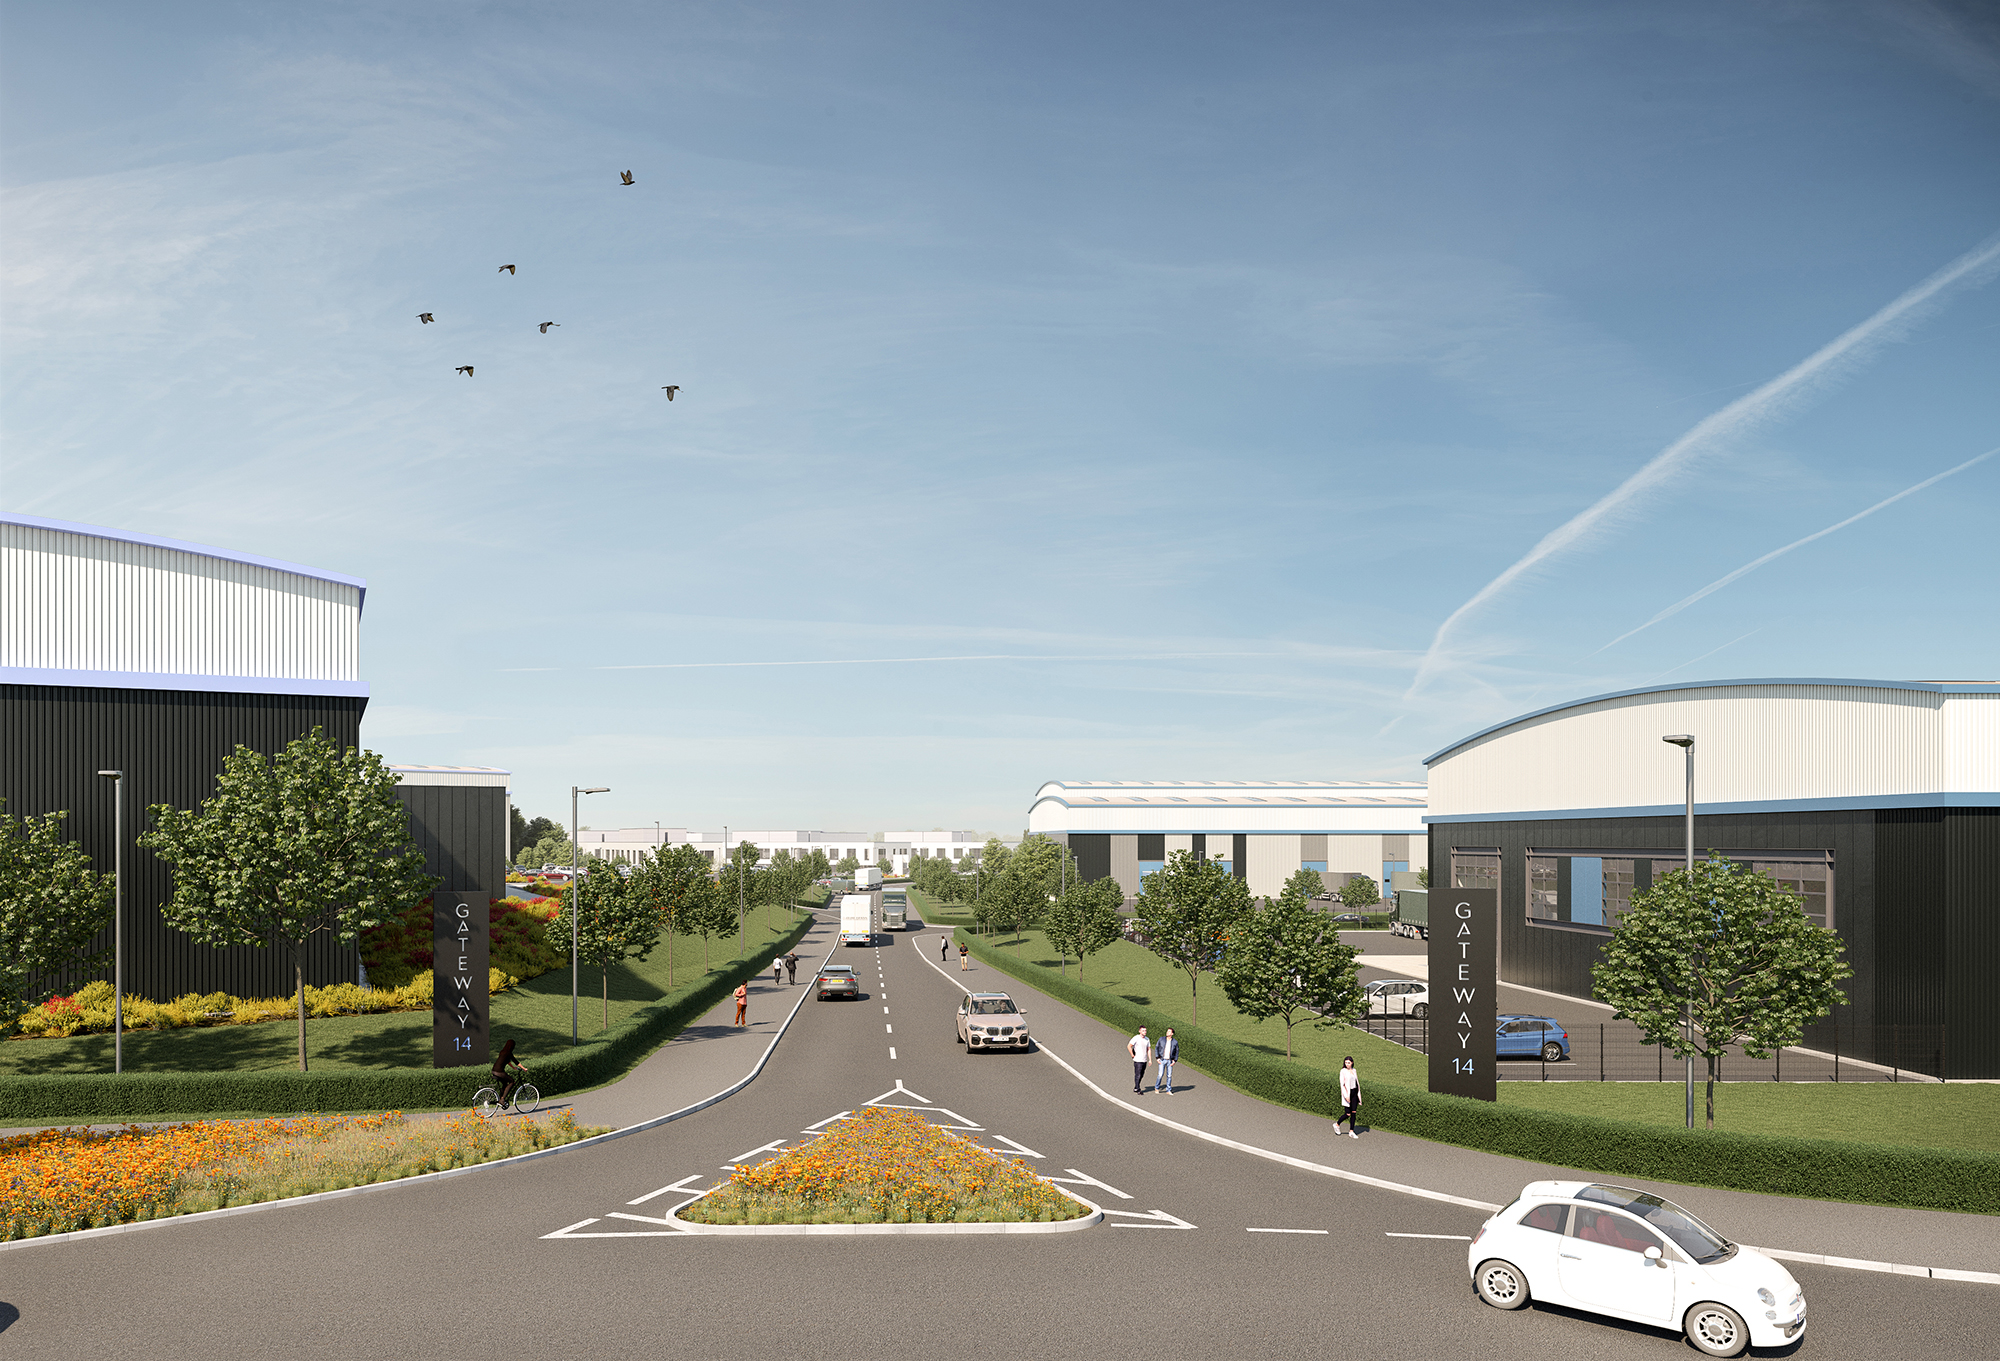 Video: Jackson appointed for Gateway 14 scheme